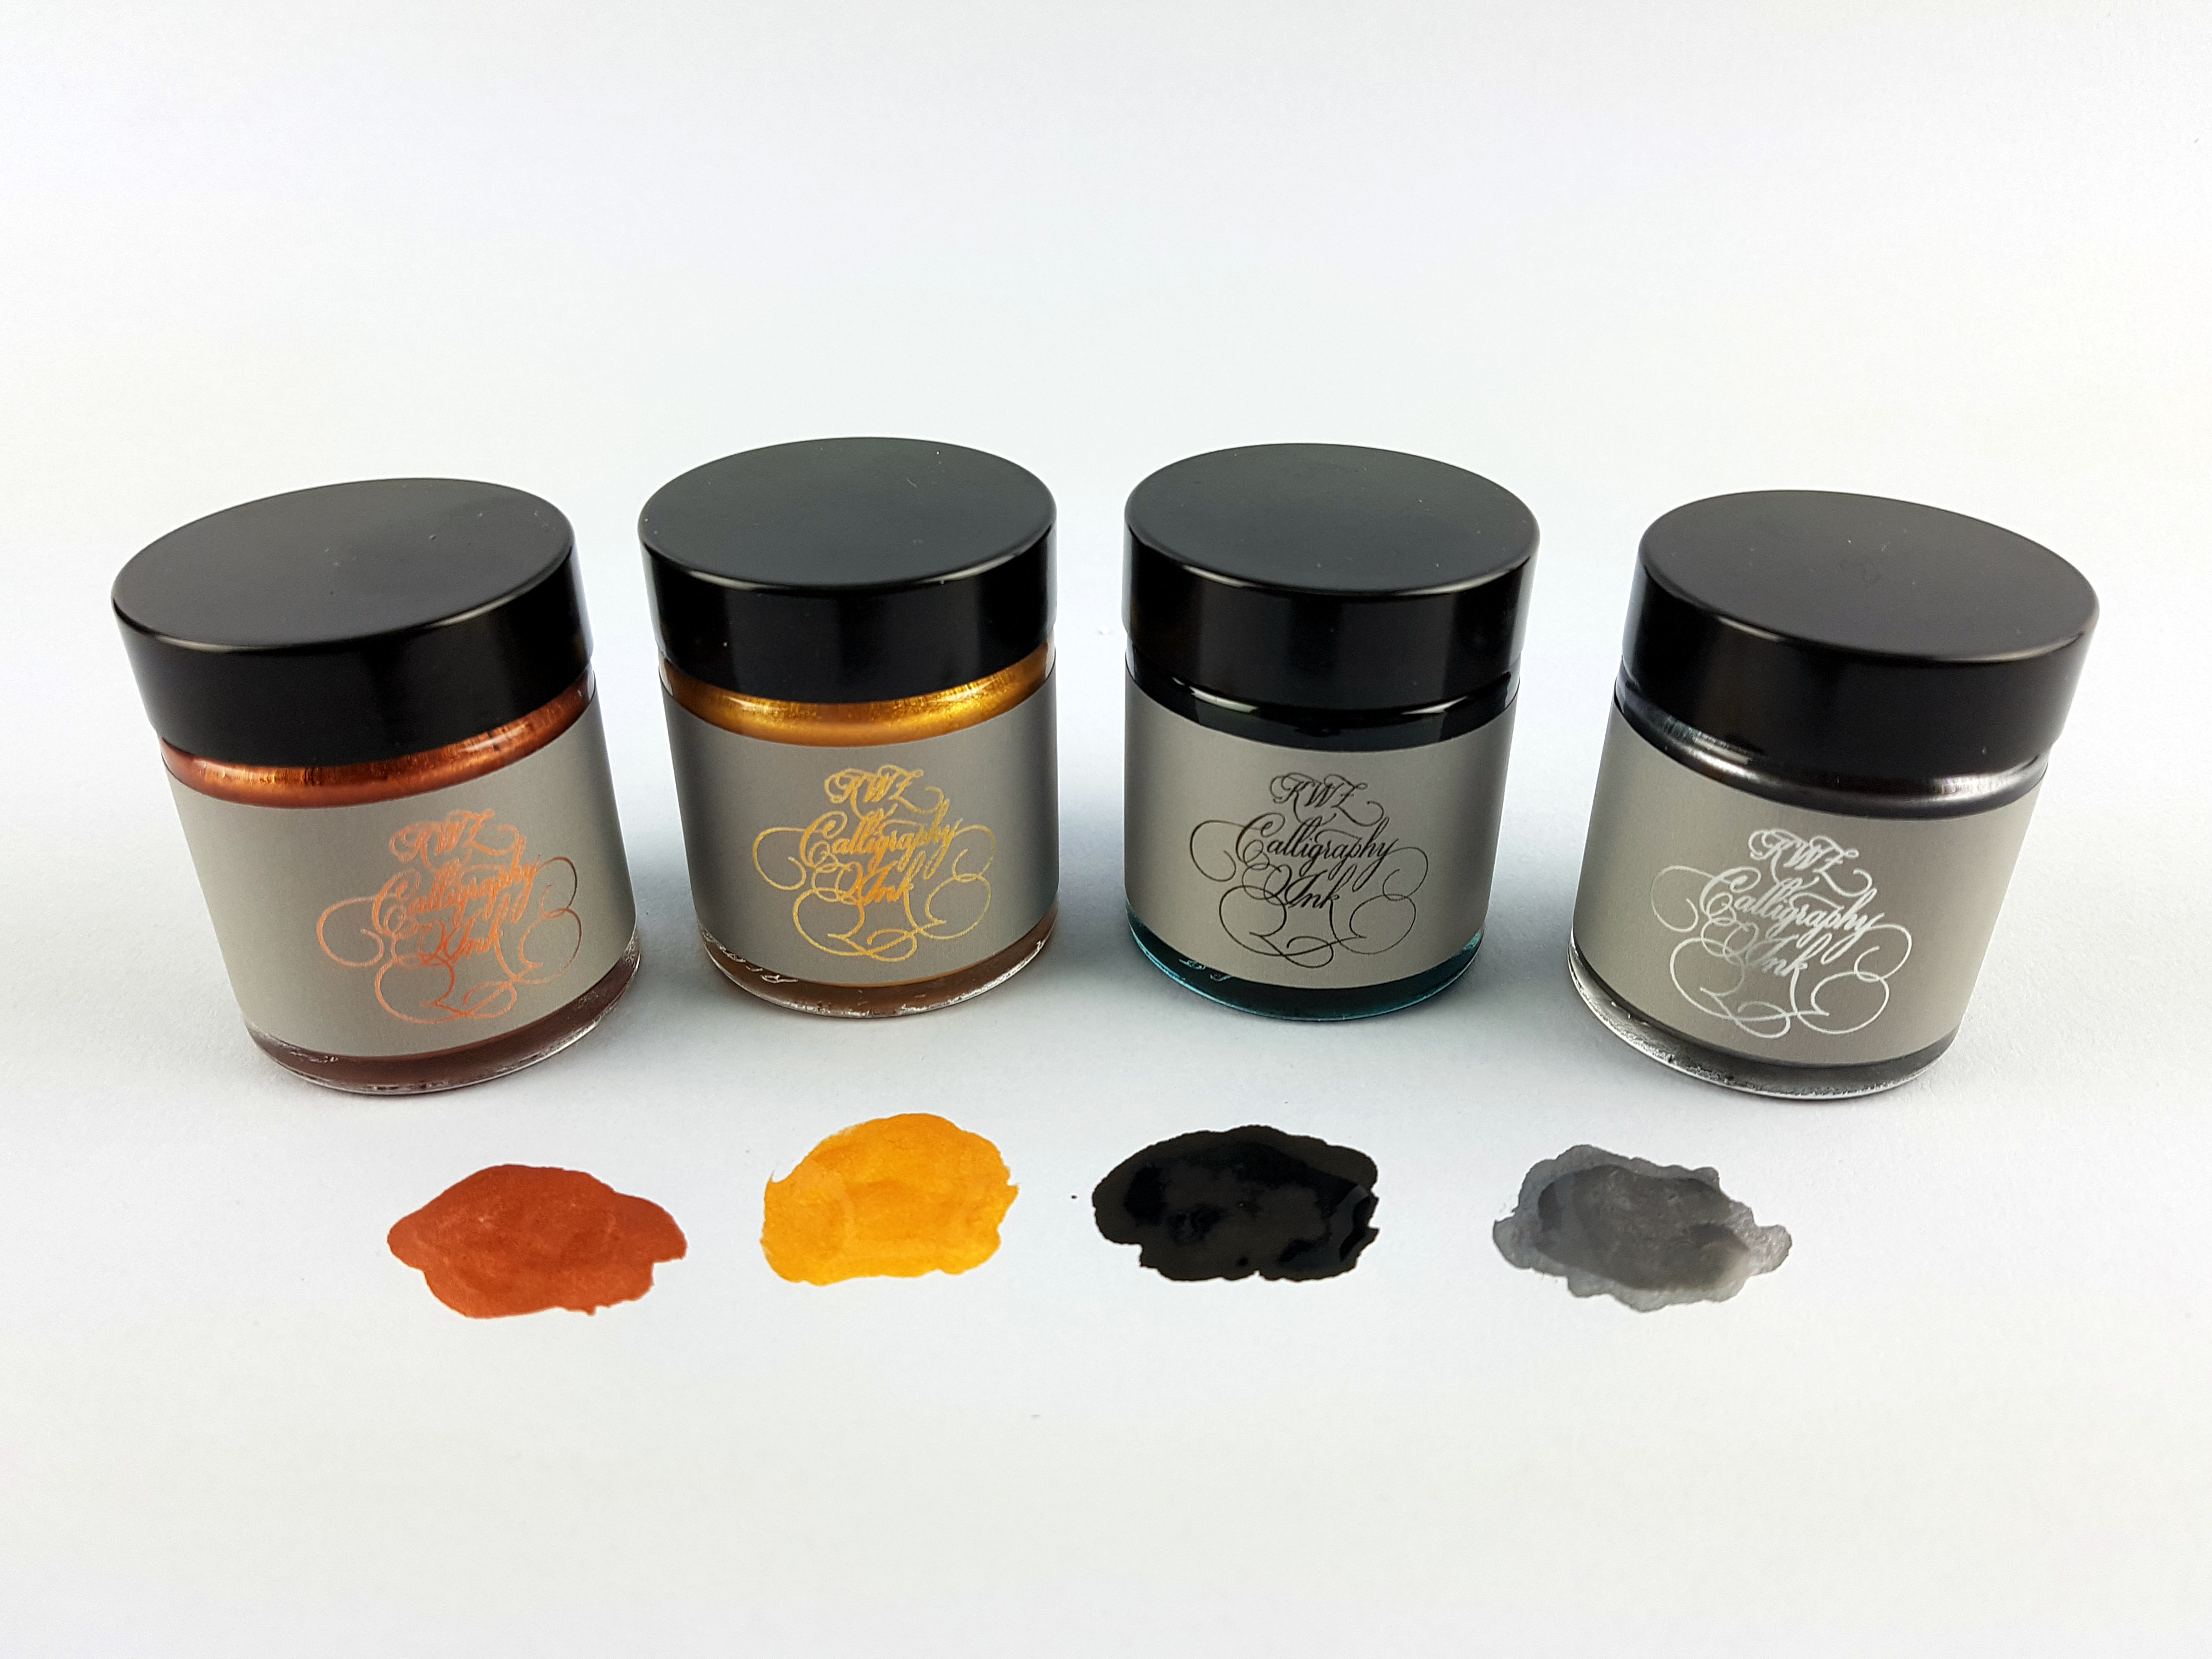 KWZ Calligraphy Ink 25g - Silver